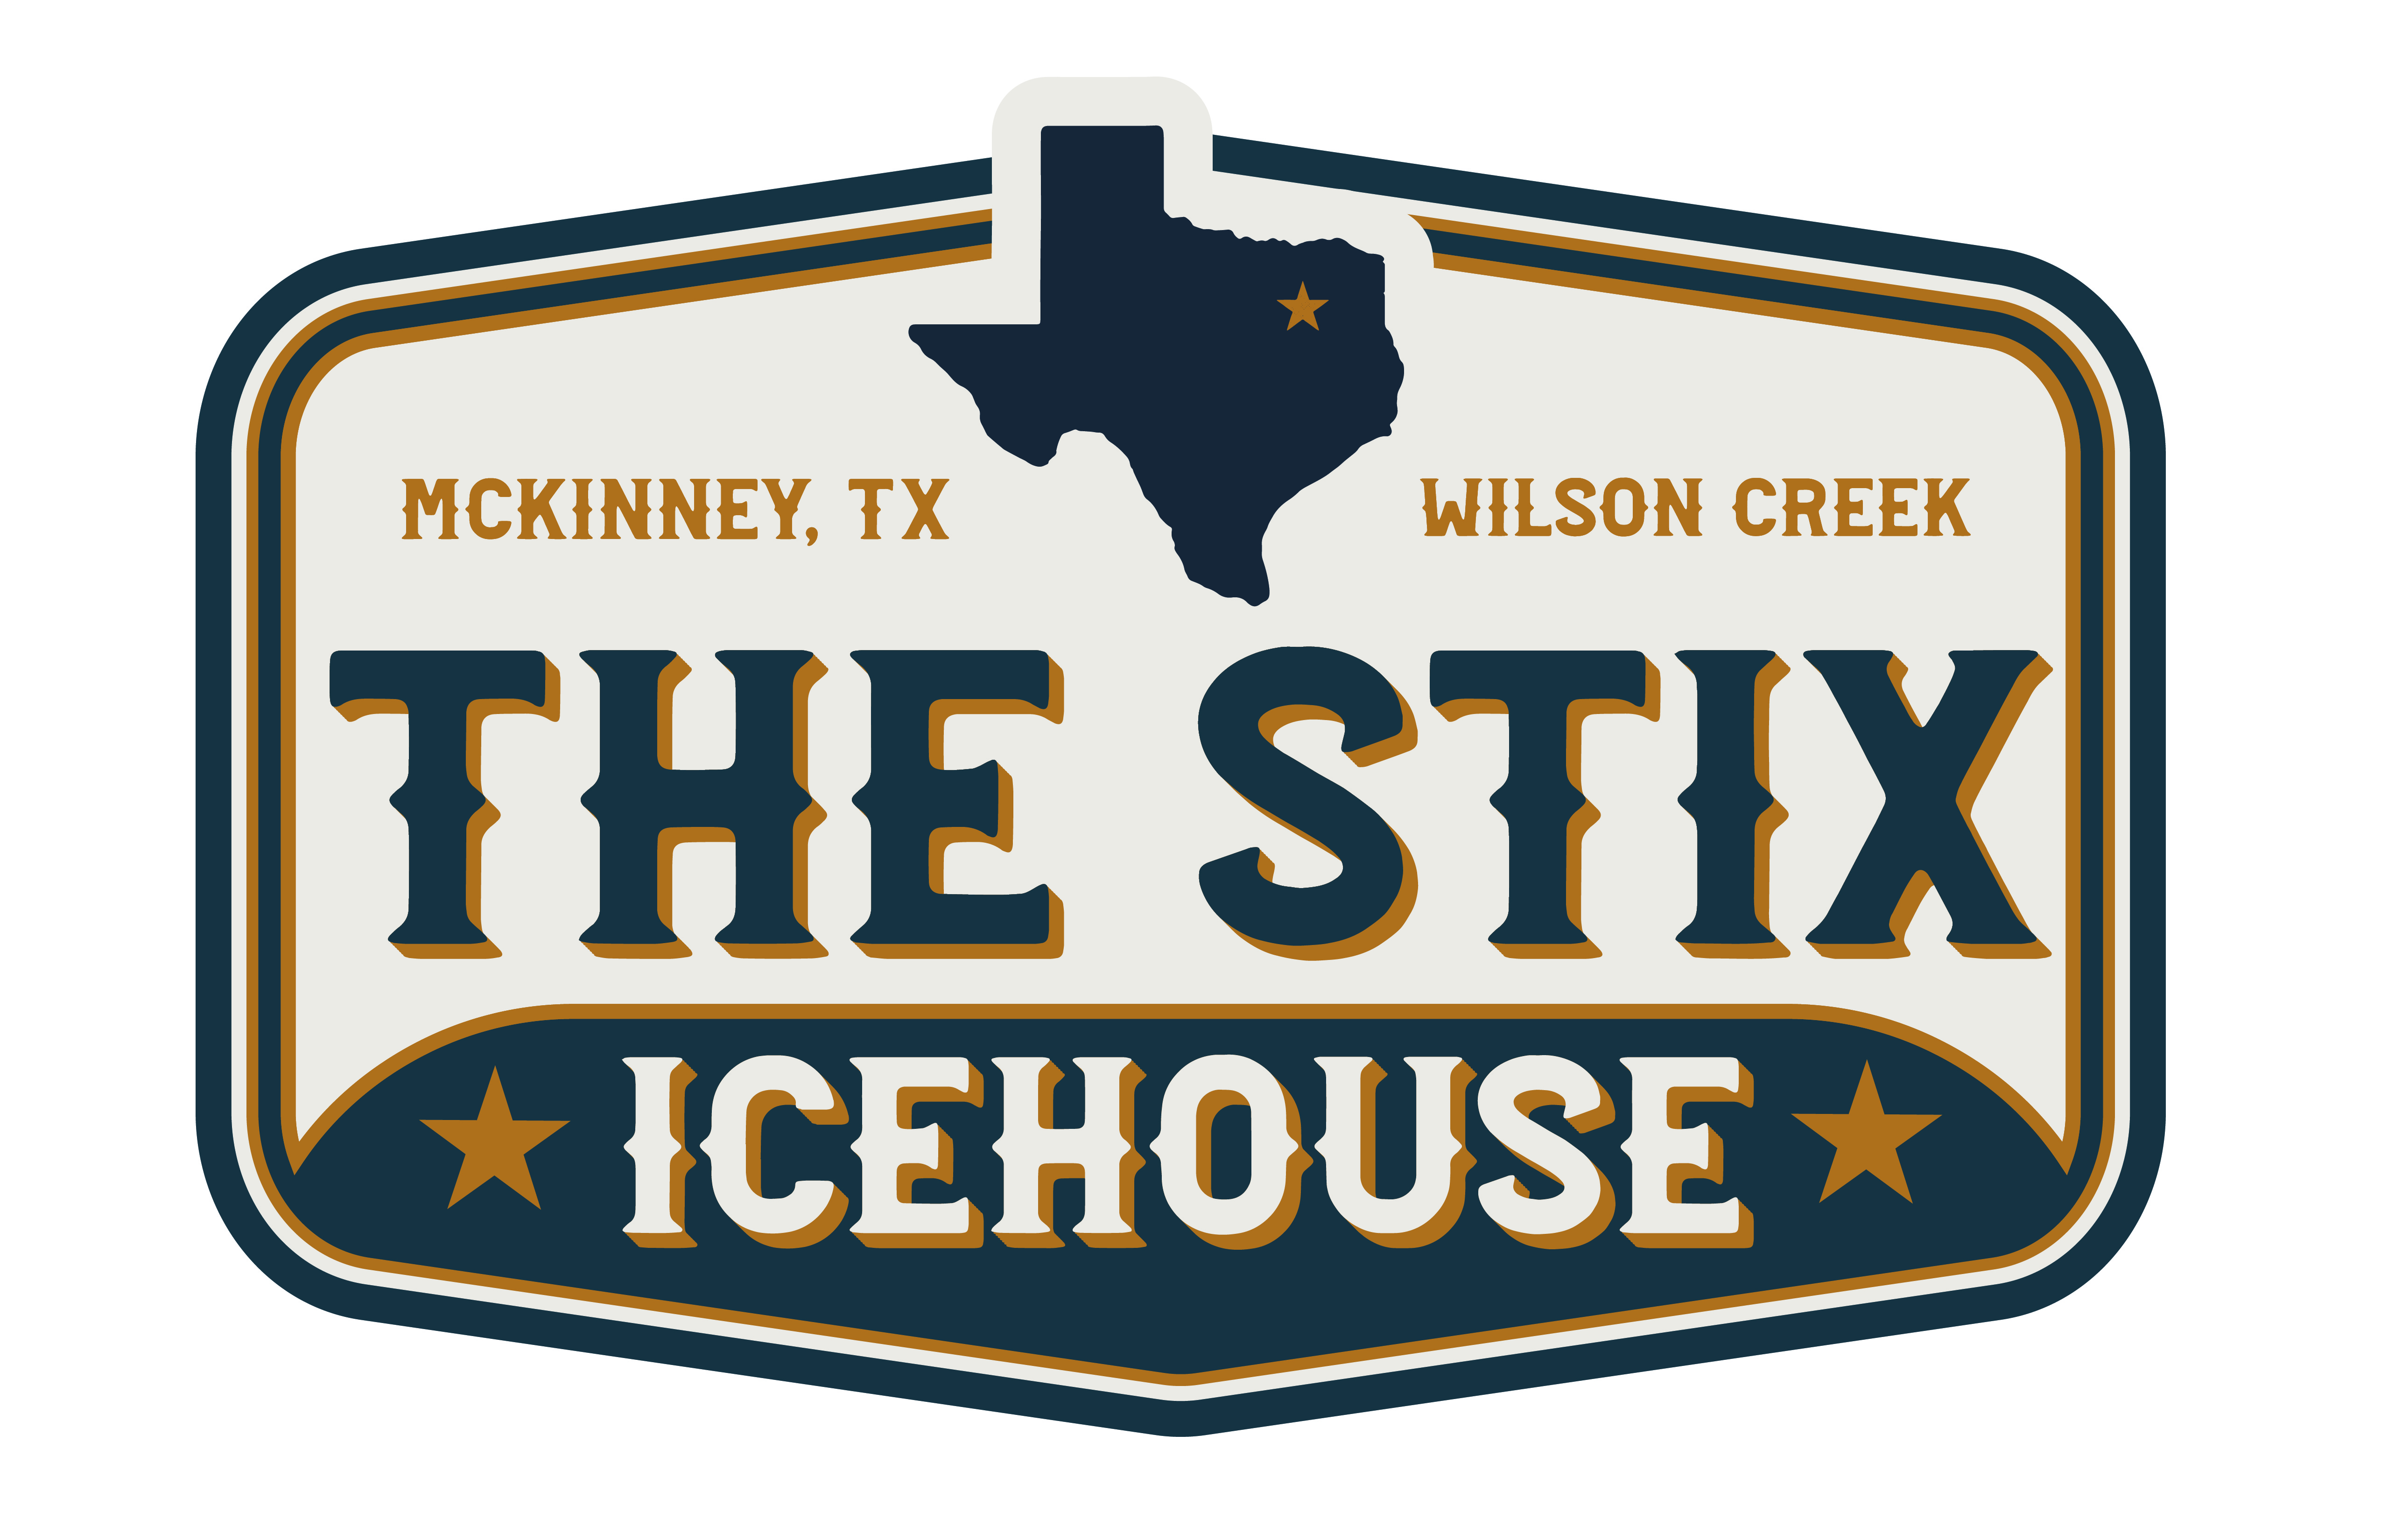 Ken & Cathy Live at The Stix Icehouse